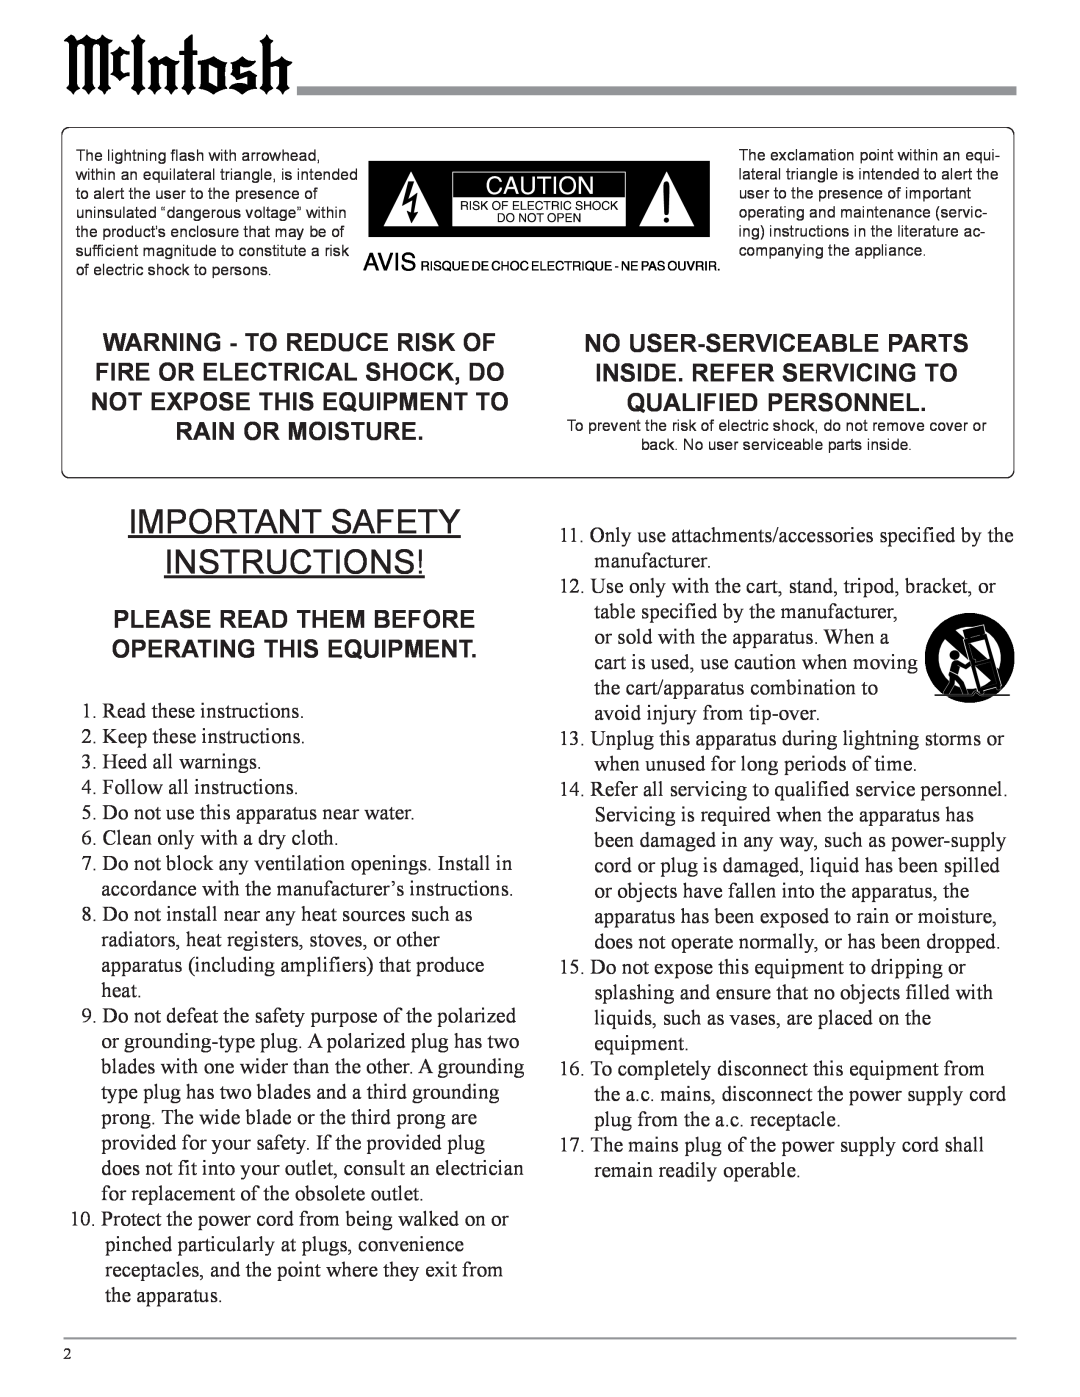 McIntosh MA2275 owner manual Important Safety Instructions, Please Read Them Before Operating This Equipment 